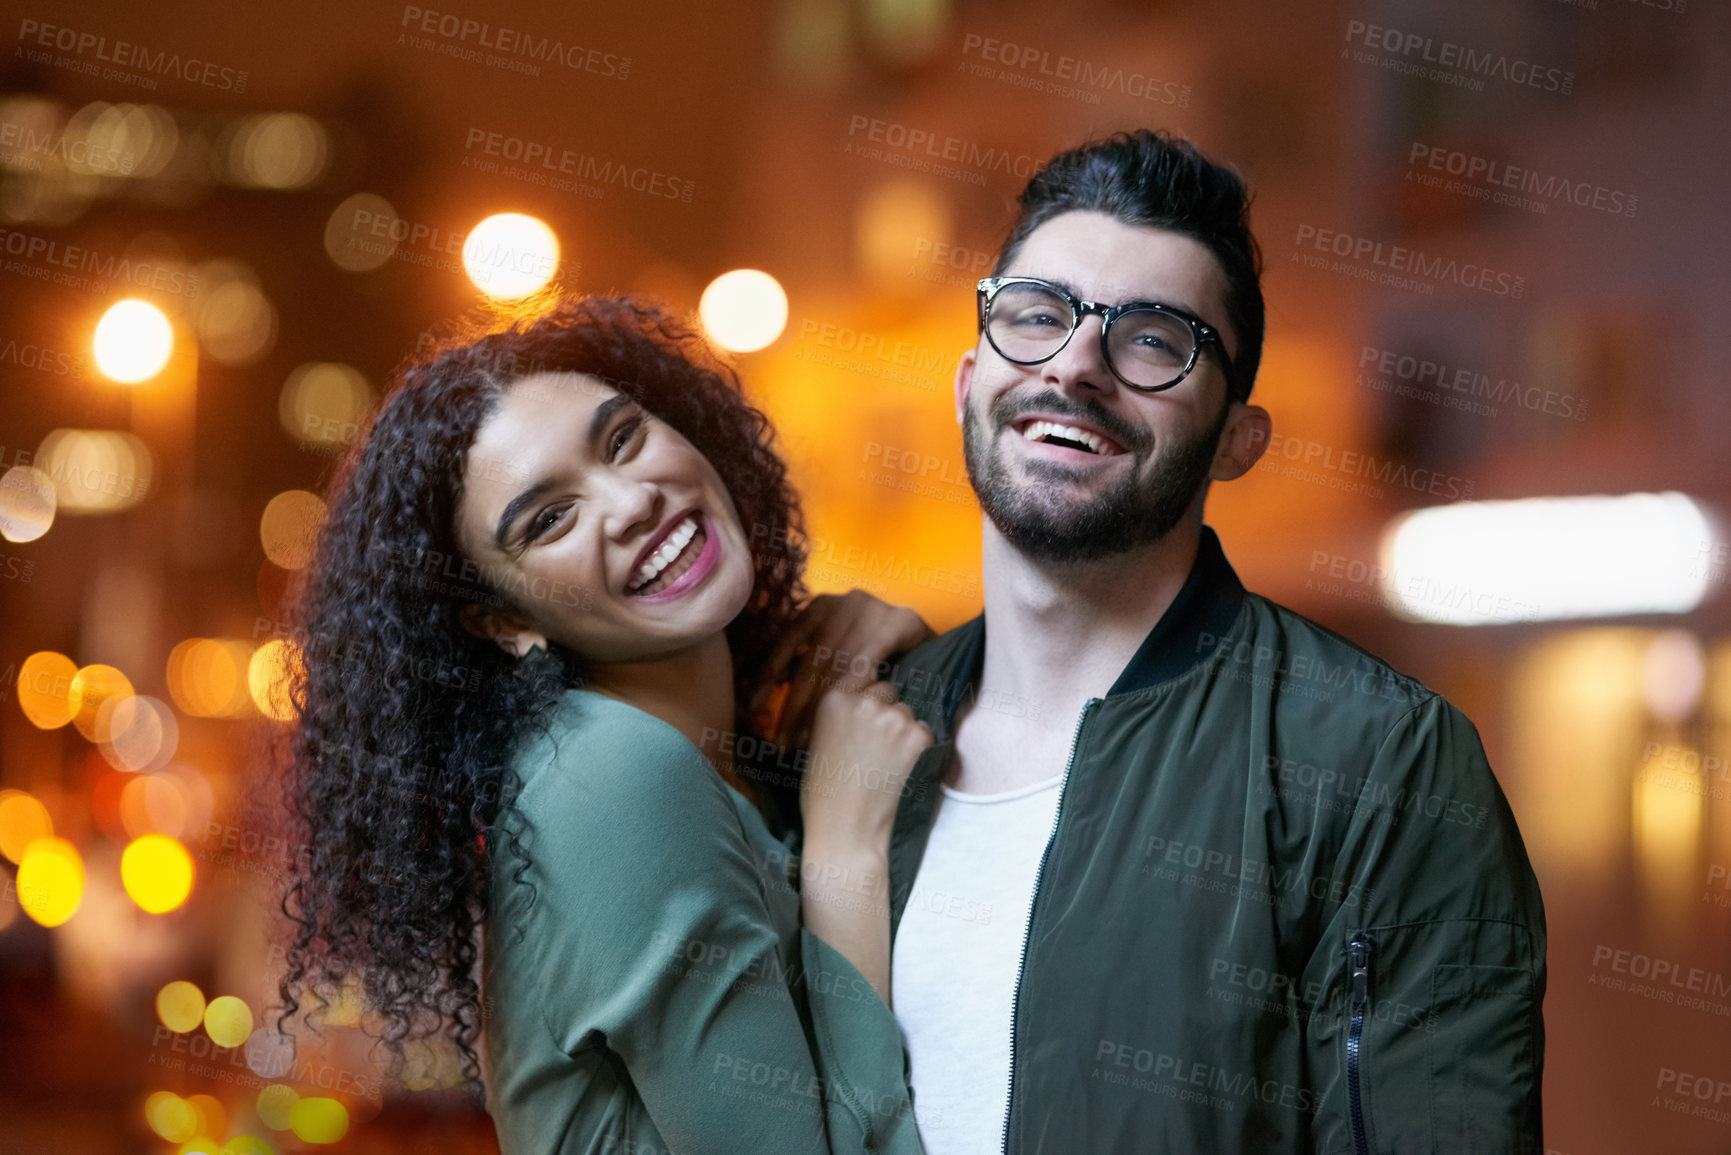 Buy stock photo Portrait of a happy young couple outdoors at night